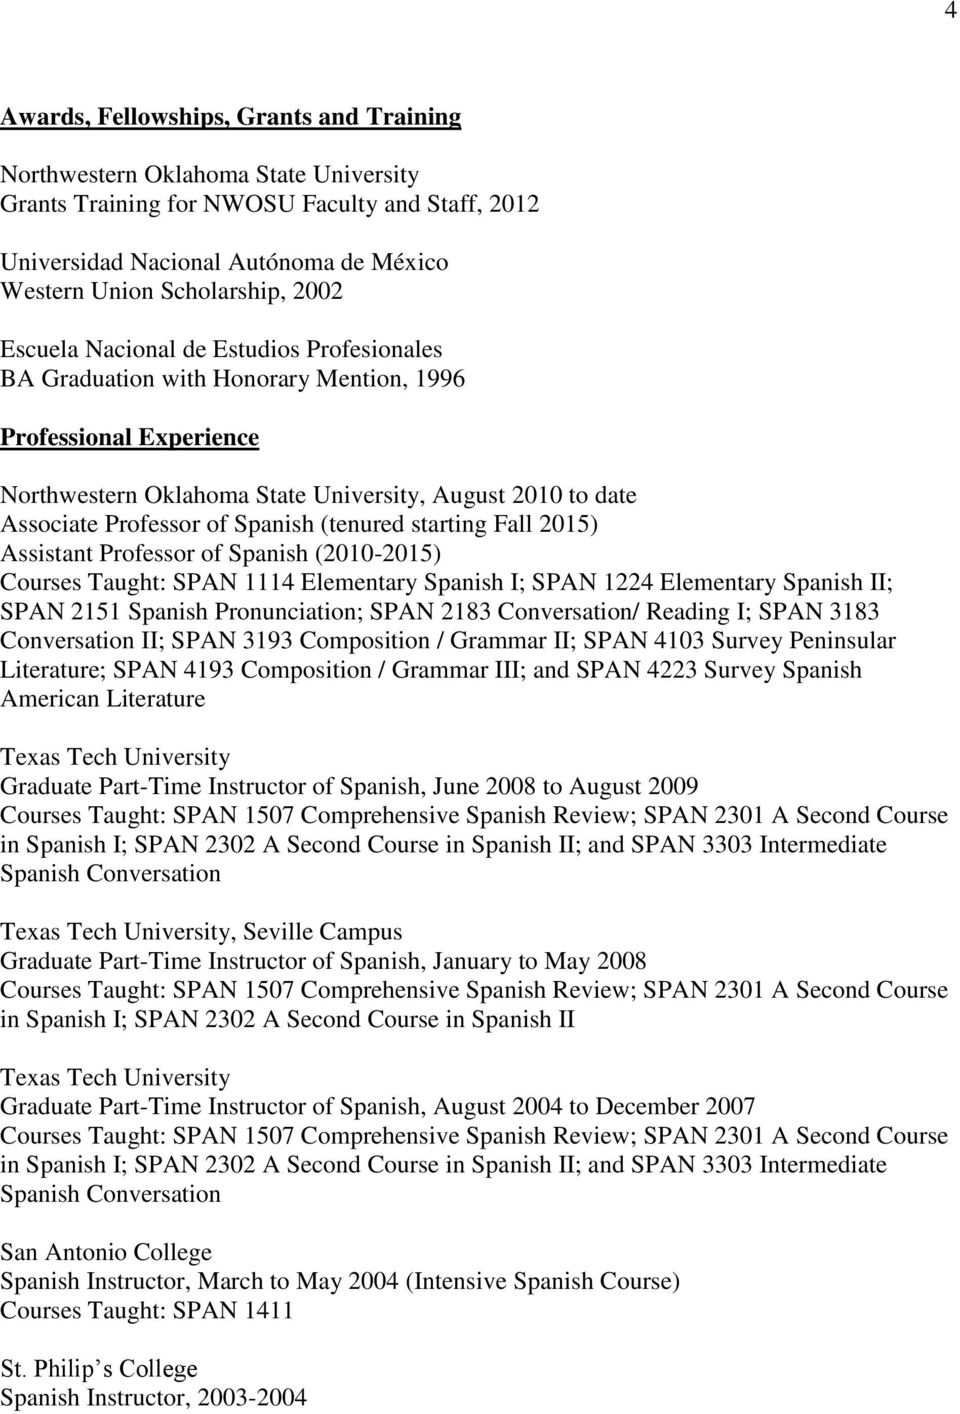 Spanish (tenured starting Fall 2015) Assistant Professor of Spanish (2010-2015) Courses Taught: SPAN 1114 Elementary Spanish I; SPAN 1224 Elementary Spanish II; SPAN 2151 Spanish Pronunciation; SPAN